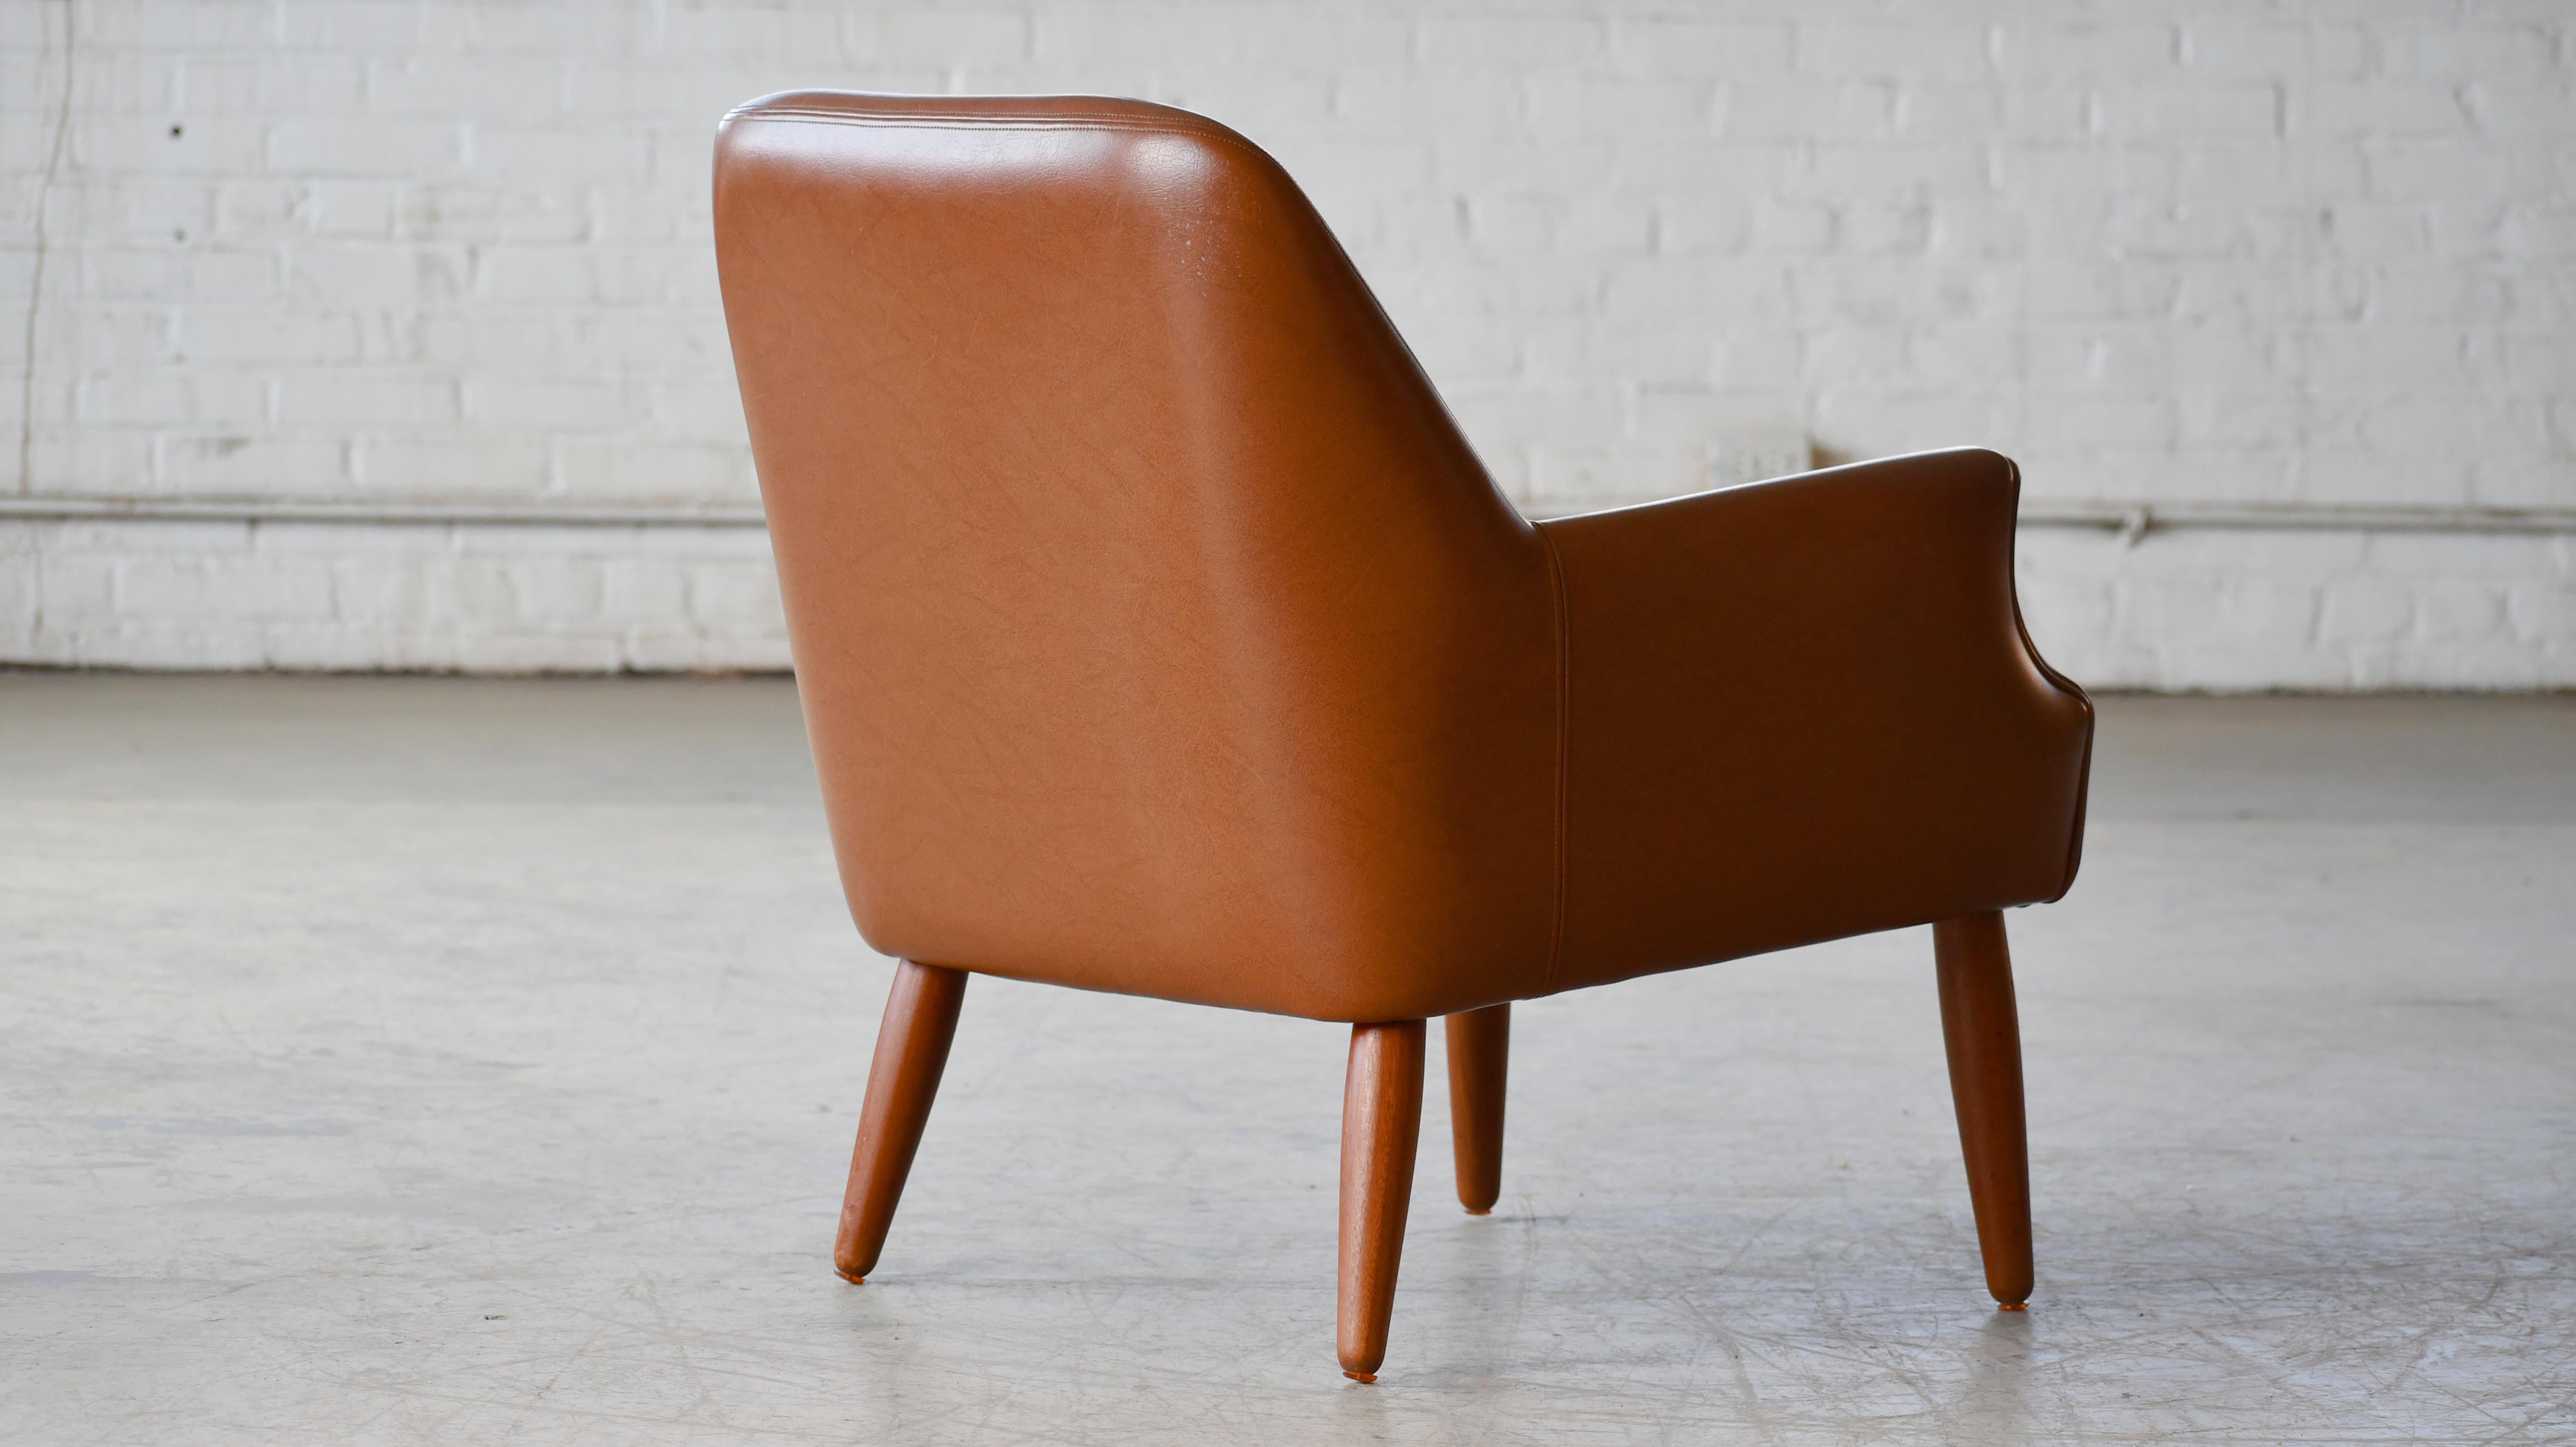 Danish Midcentury Space Age Lounge Chair in Teak and Naugahyde For Sale 5